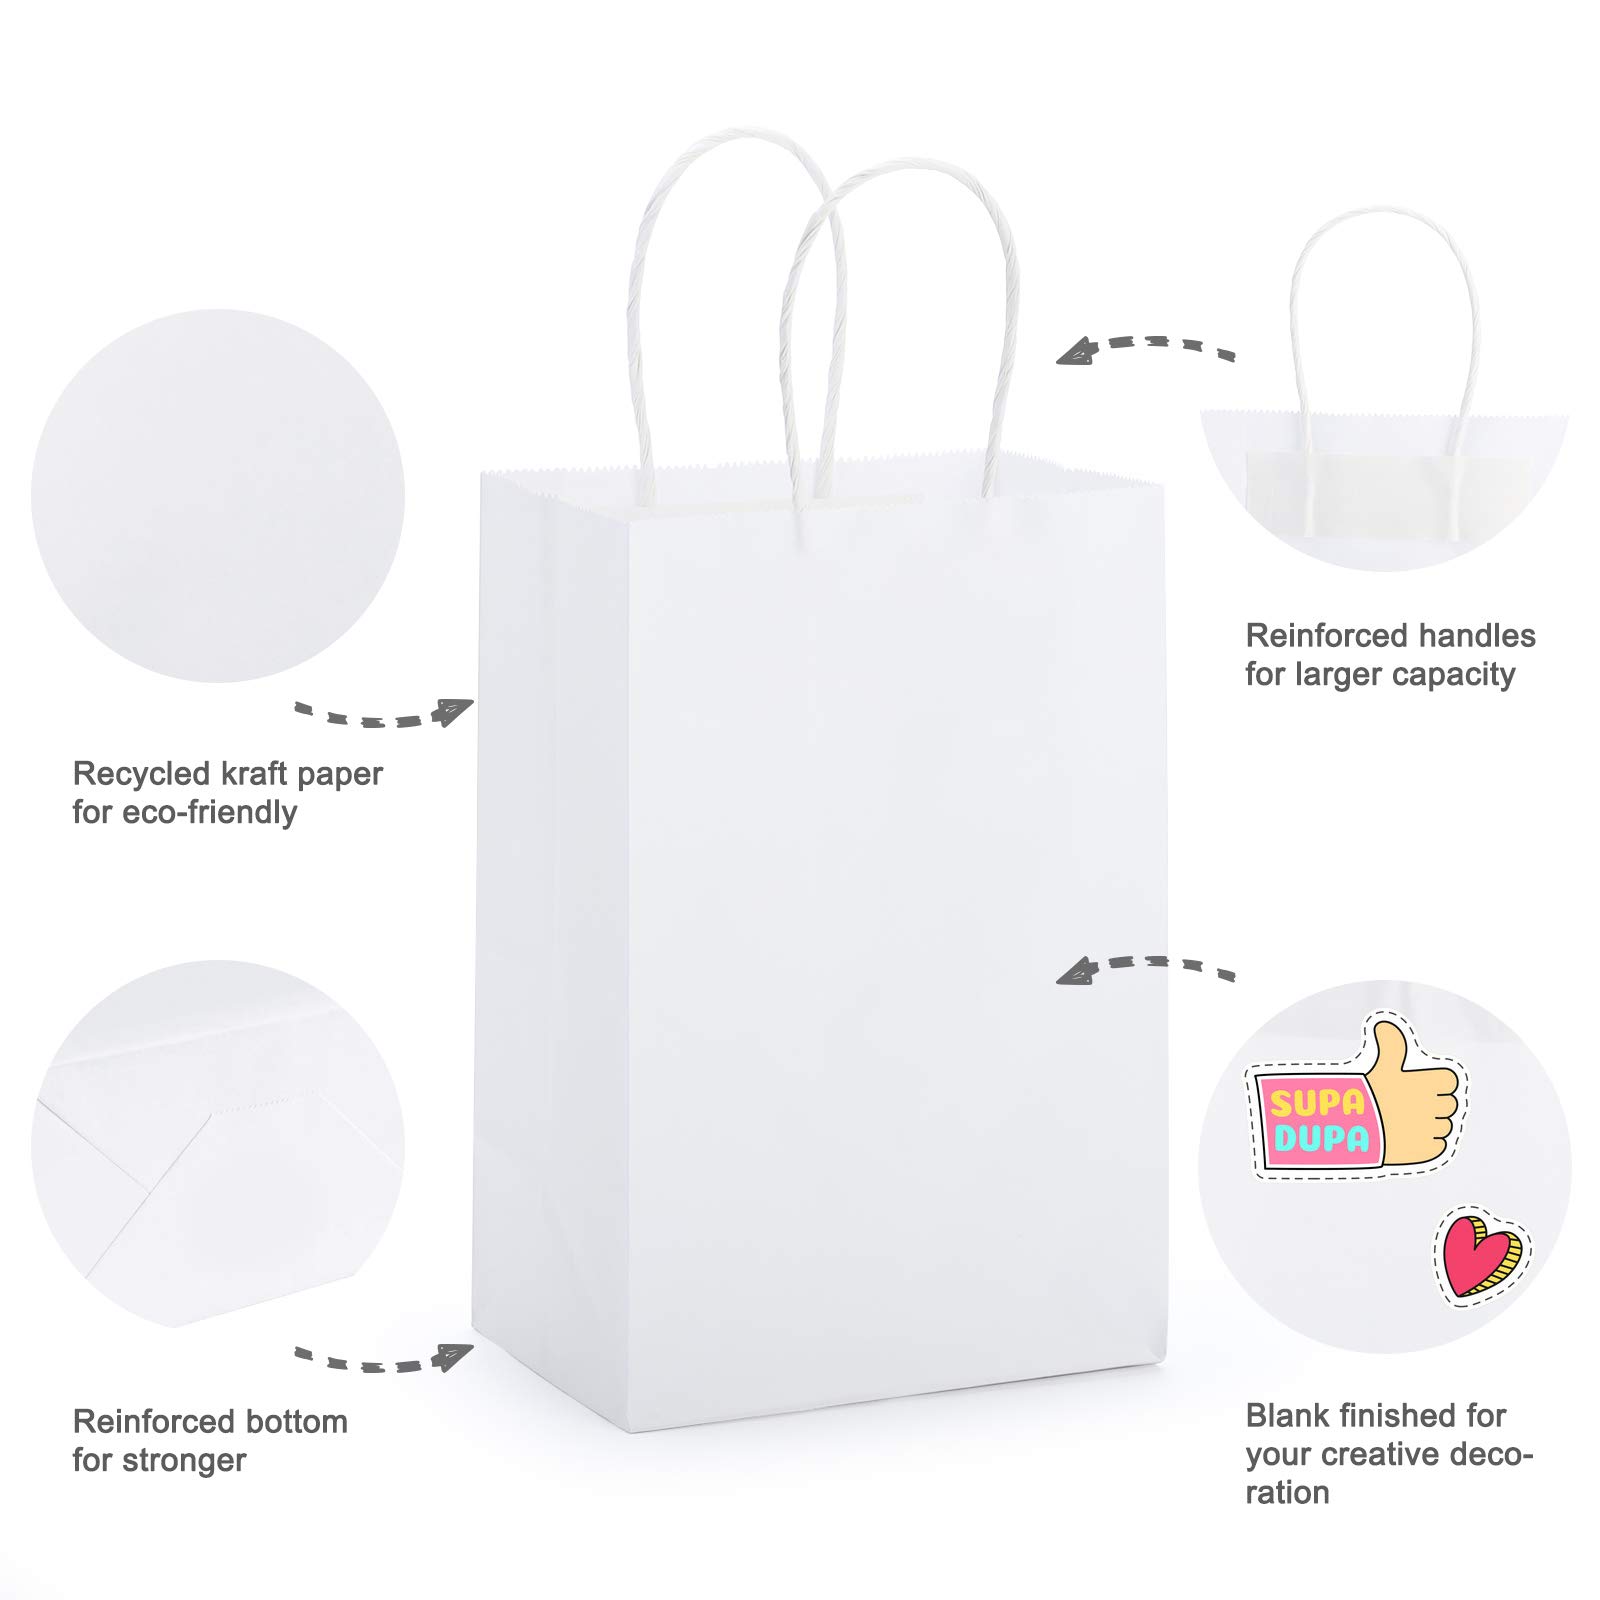 MESHA White Gift Bags 5.25x3.75x8 Inches 50Pcs & 10x5x13 Inches 50Pcs Paper Bags with Handles Small Shopping Bags,Wedding Party Favor Bags